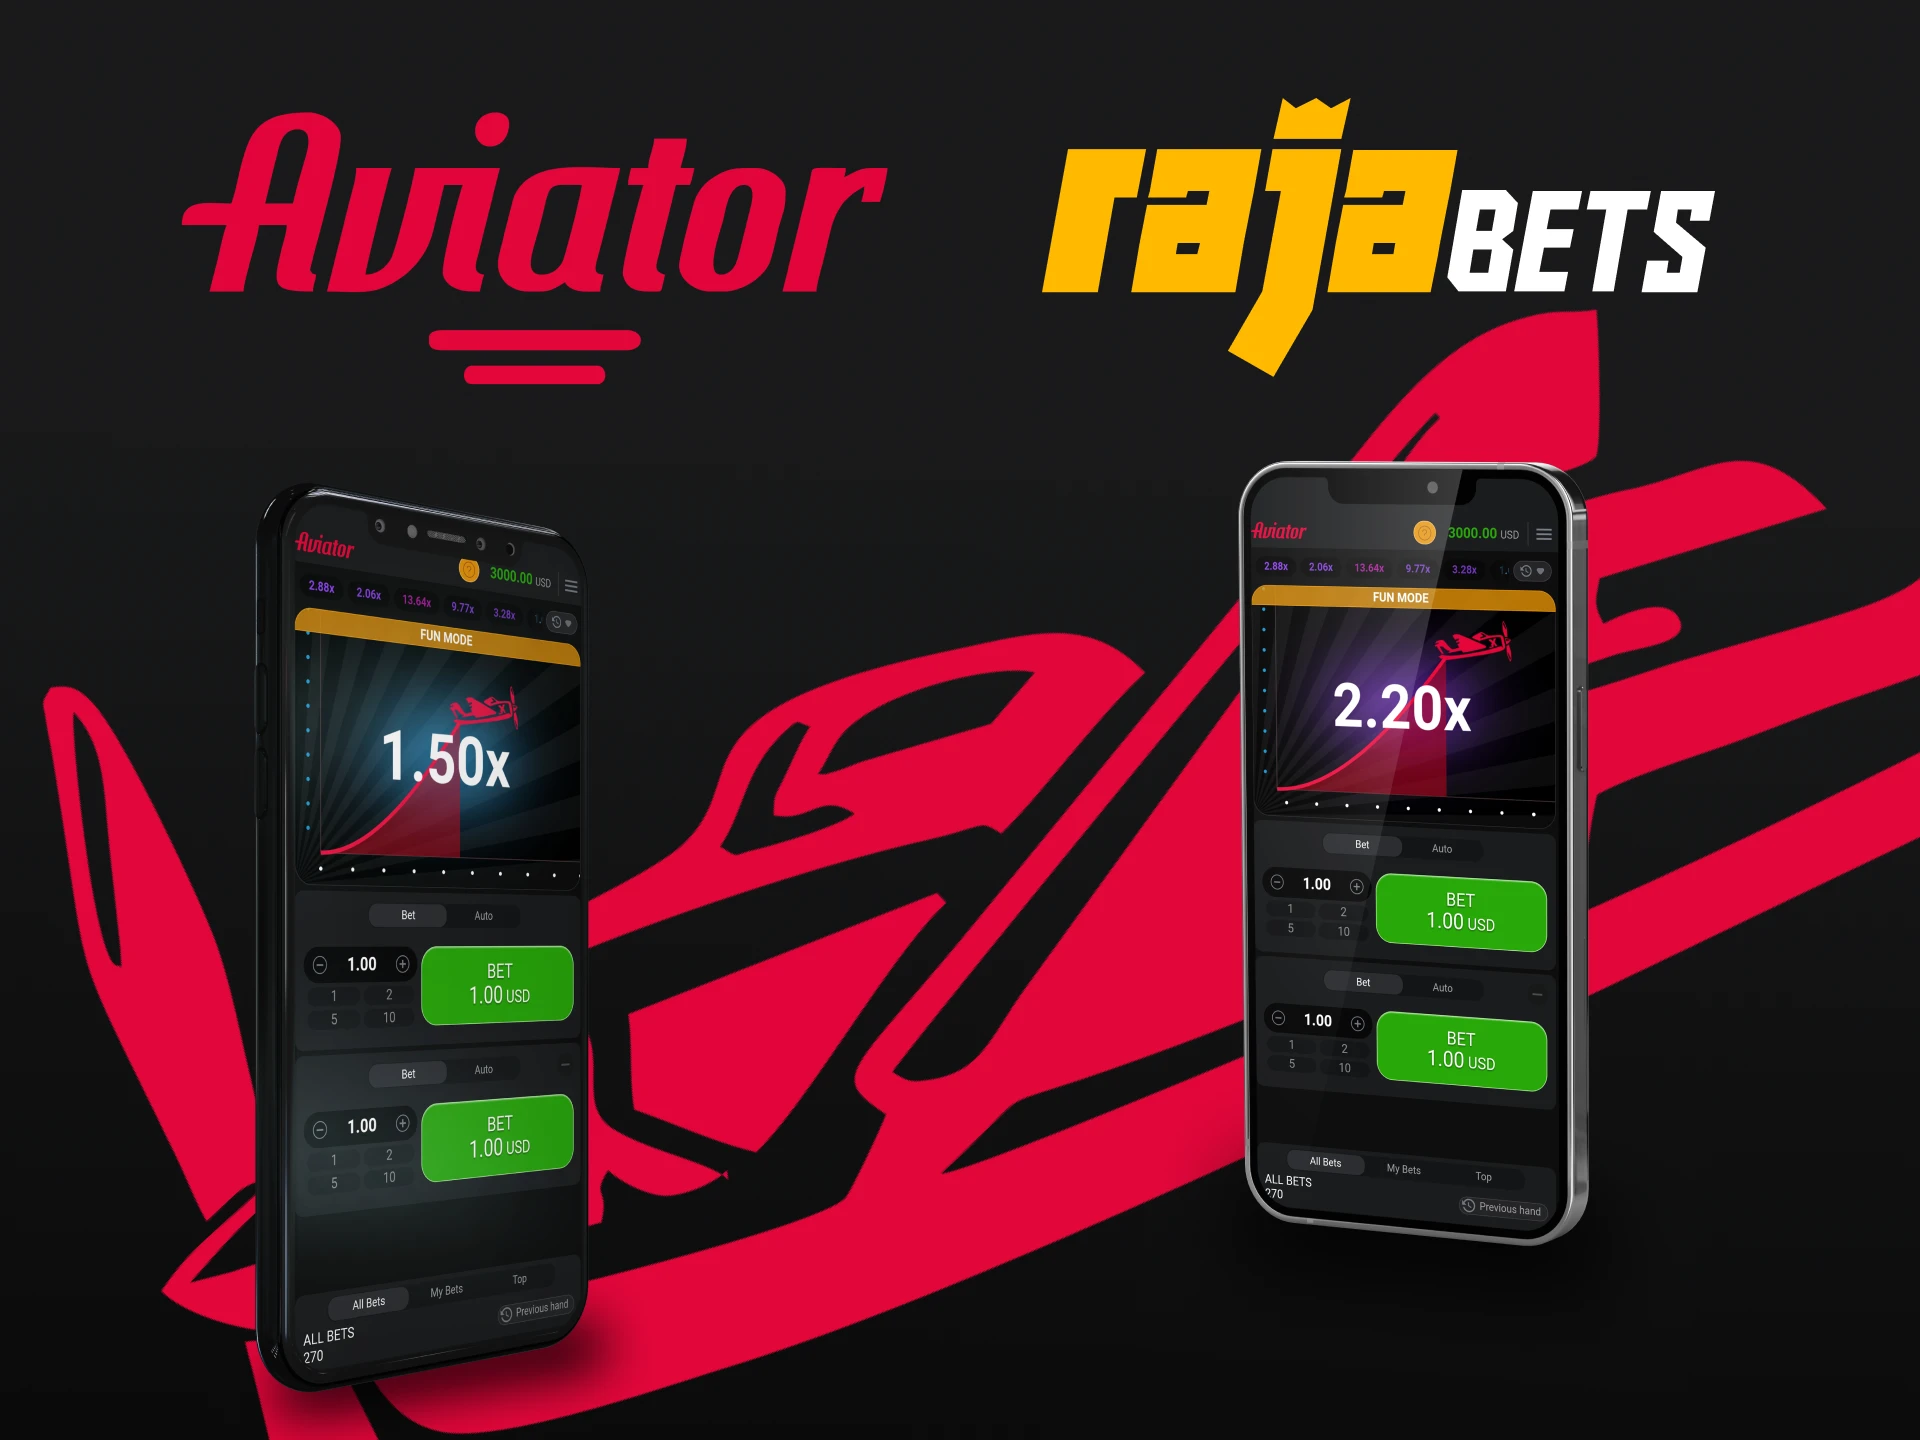 Find out on which device is better to play Aviator by Rajabets.